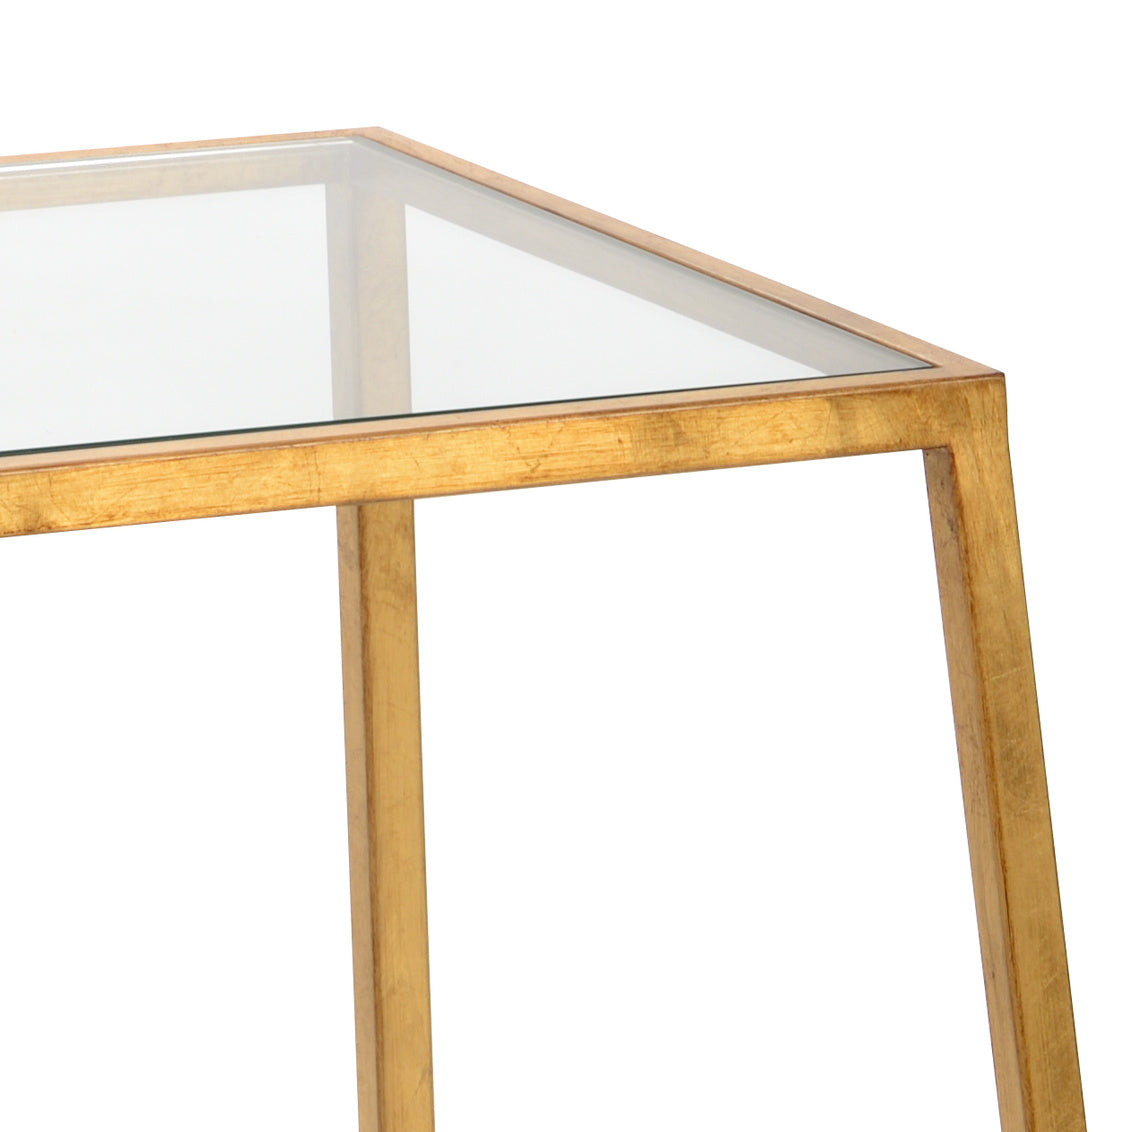 Bauhaus Table from the Jamie Merida Collection for Chelsea House - Side table with gold leaf base and glass top isolated on white backgorund